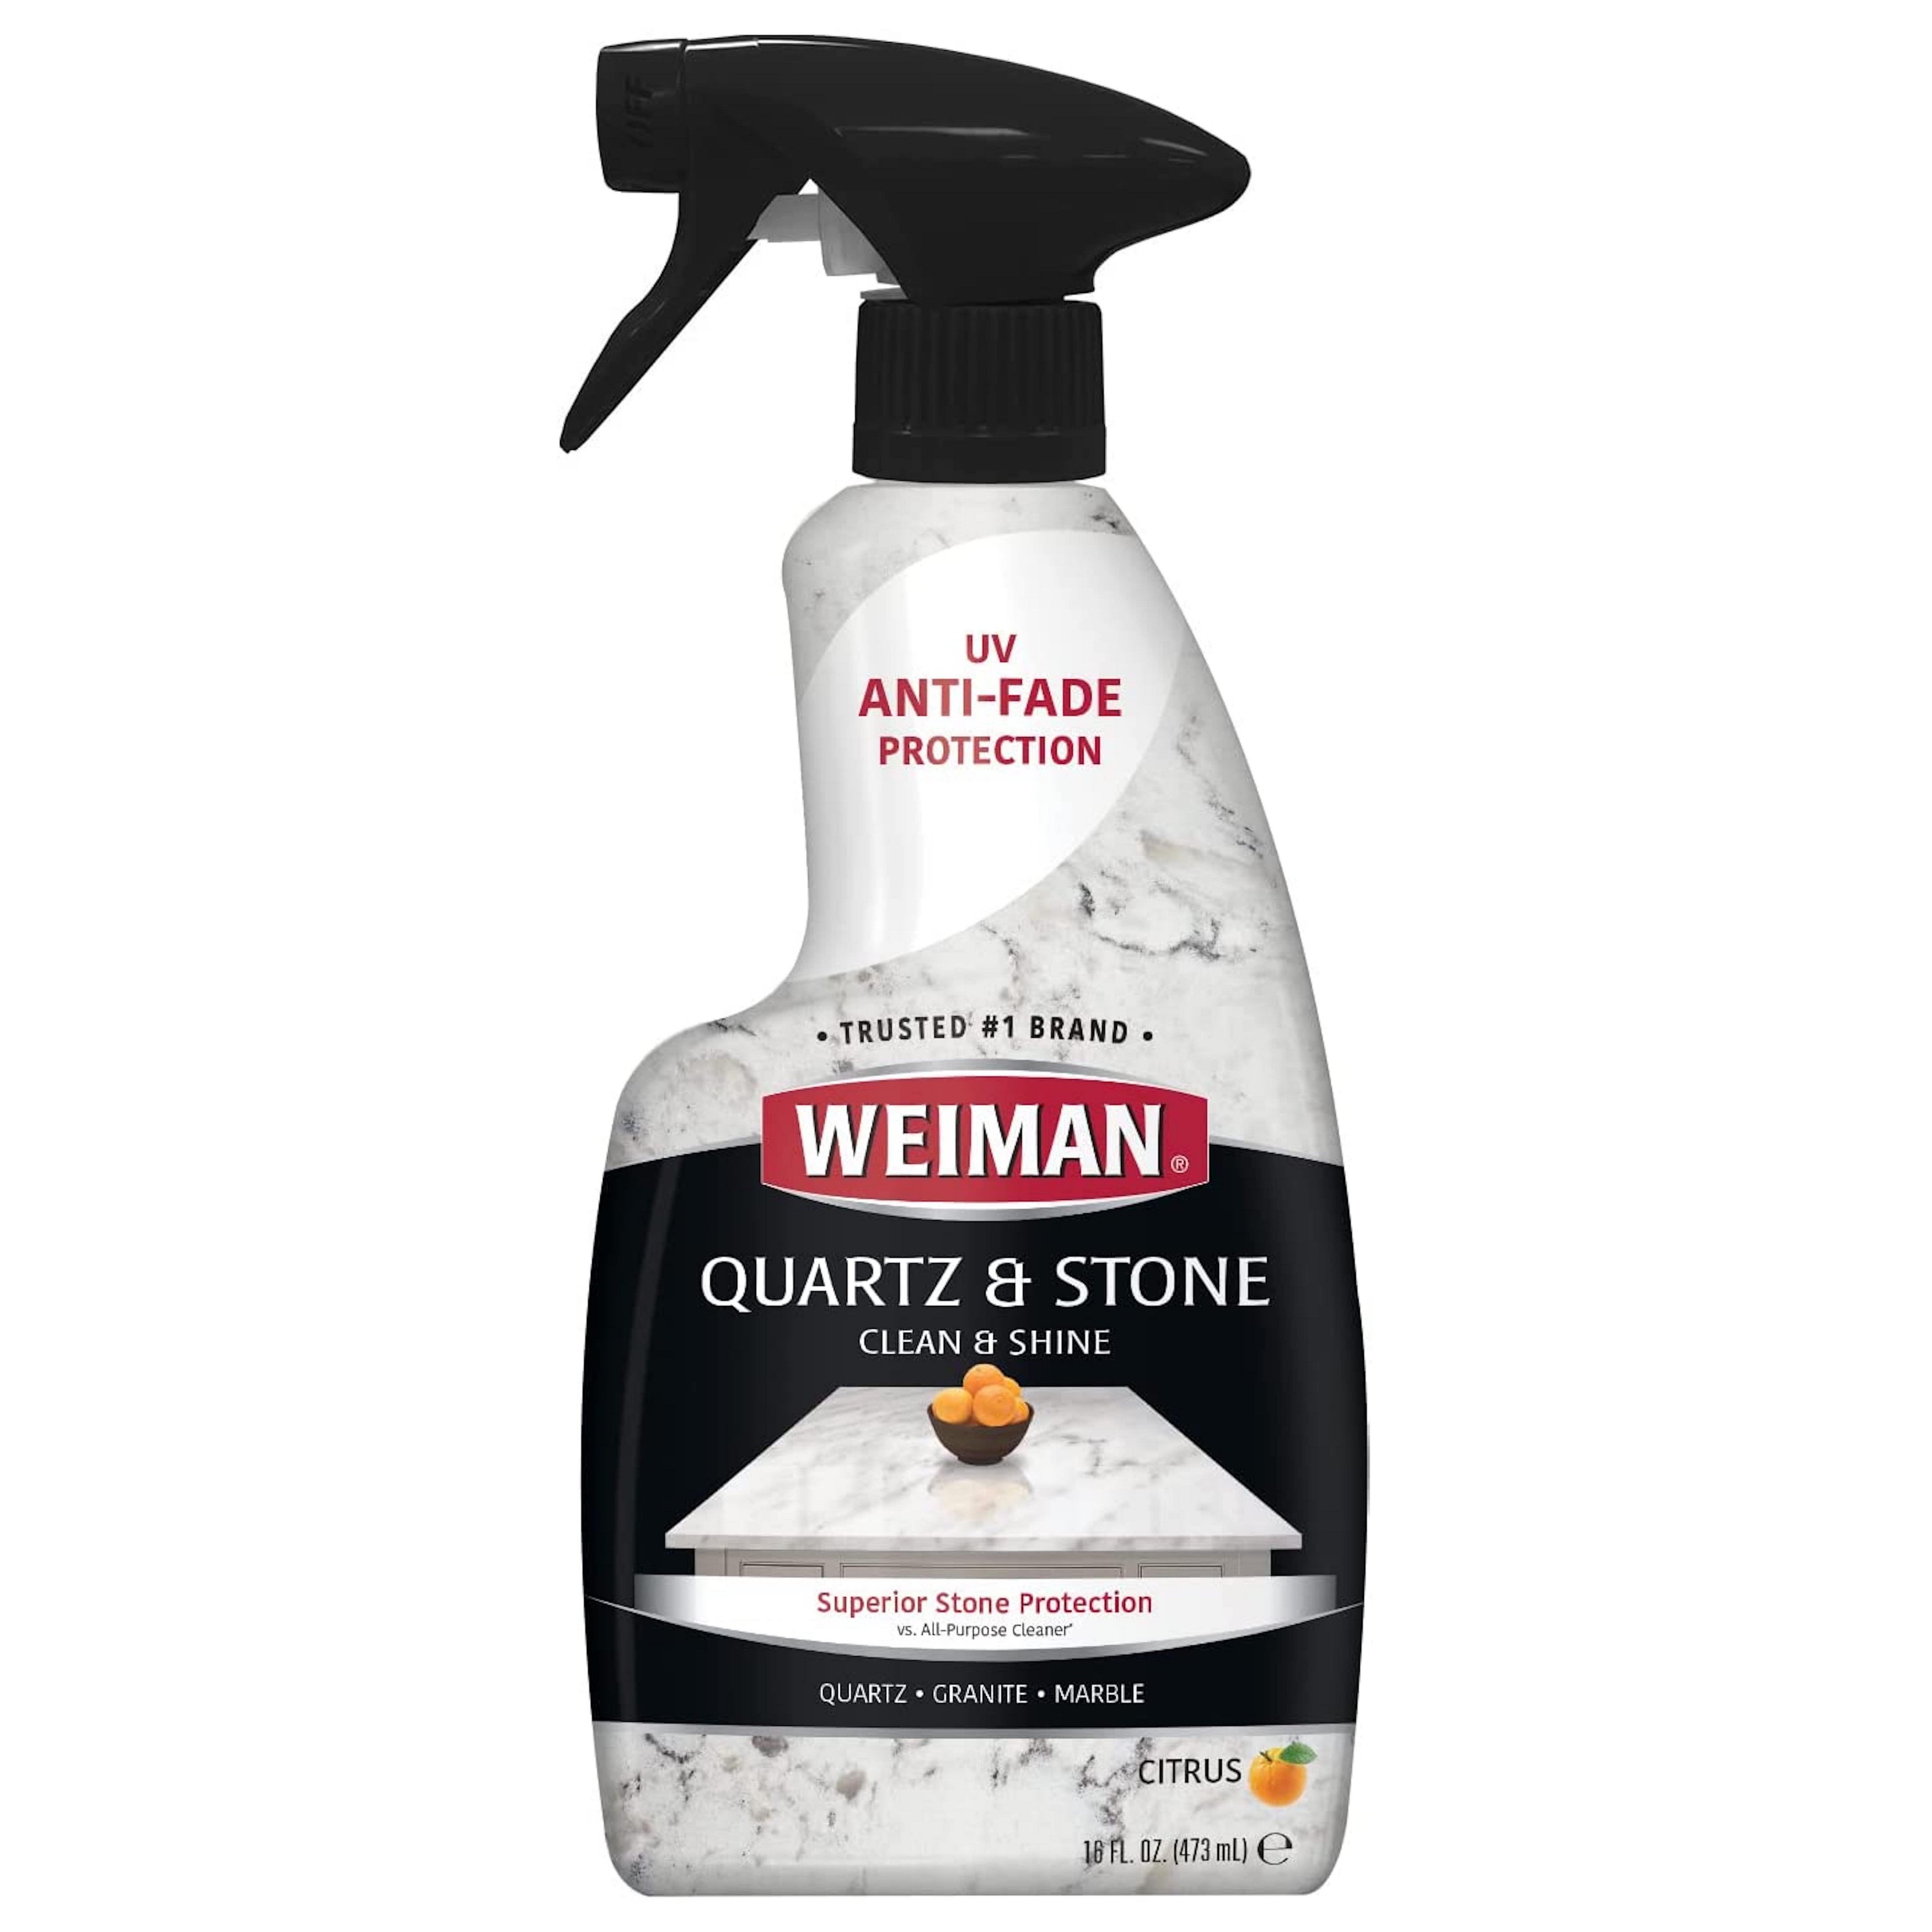 Weiman Cook Top Cleaner Spray - Shop Oven & Stove Cleaners at H-E-B